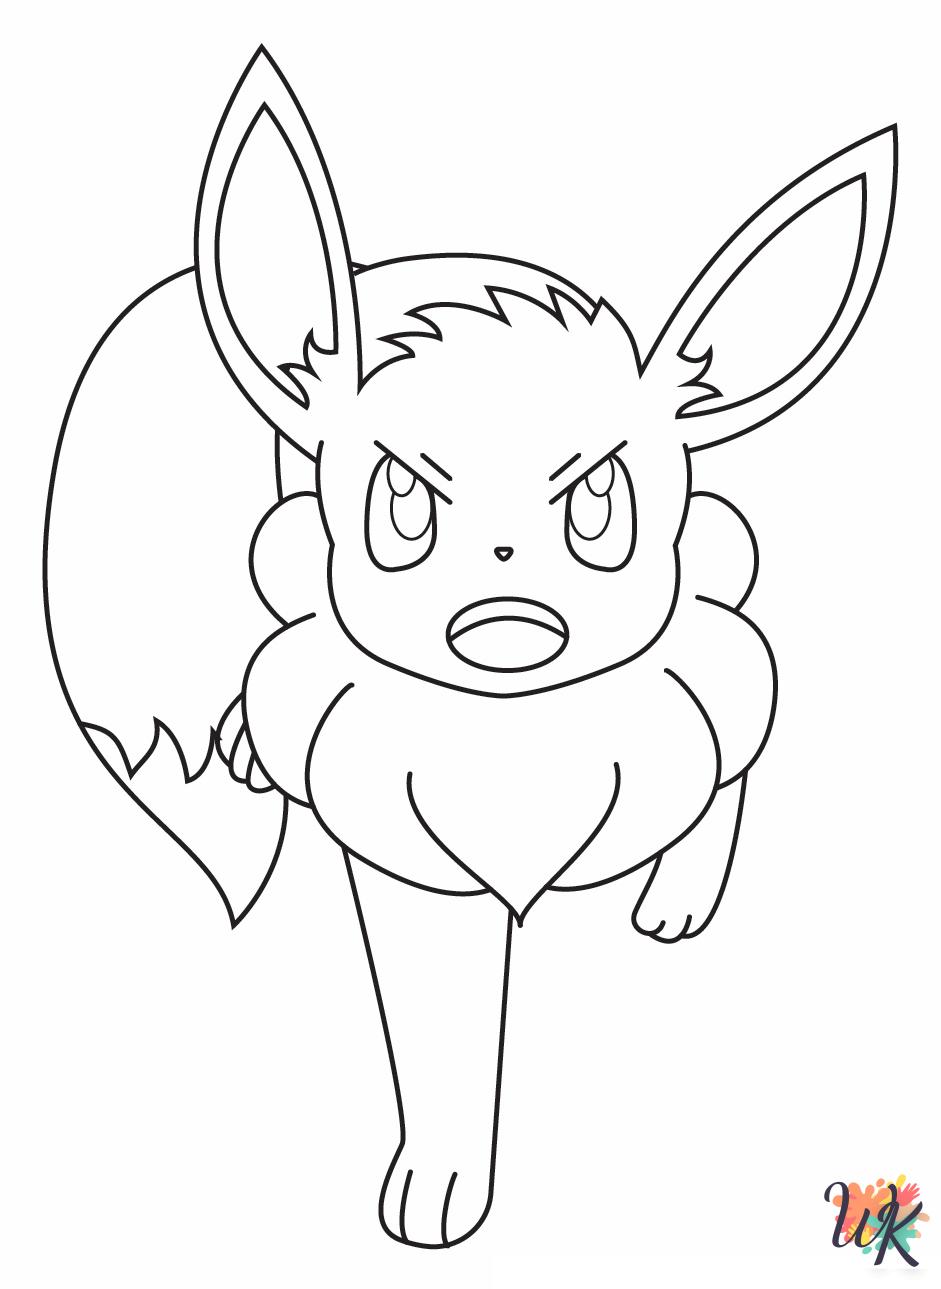 old-fashioned Eevee coloring pages